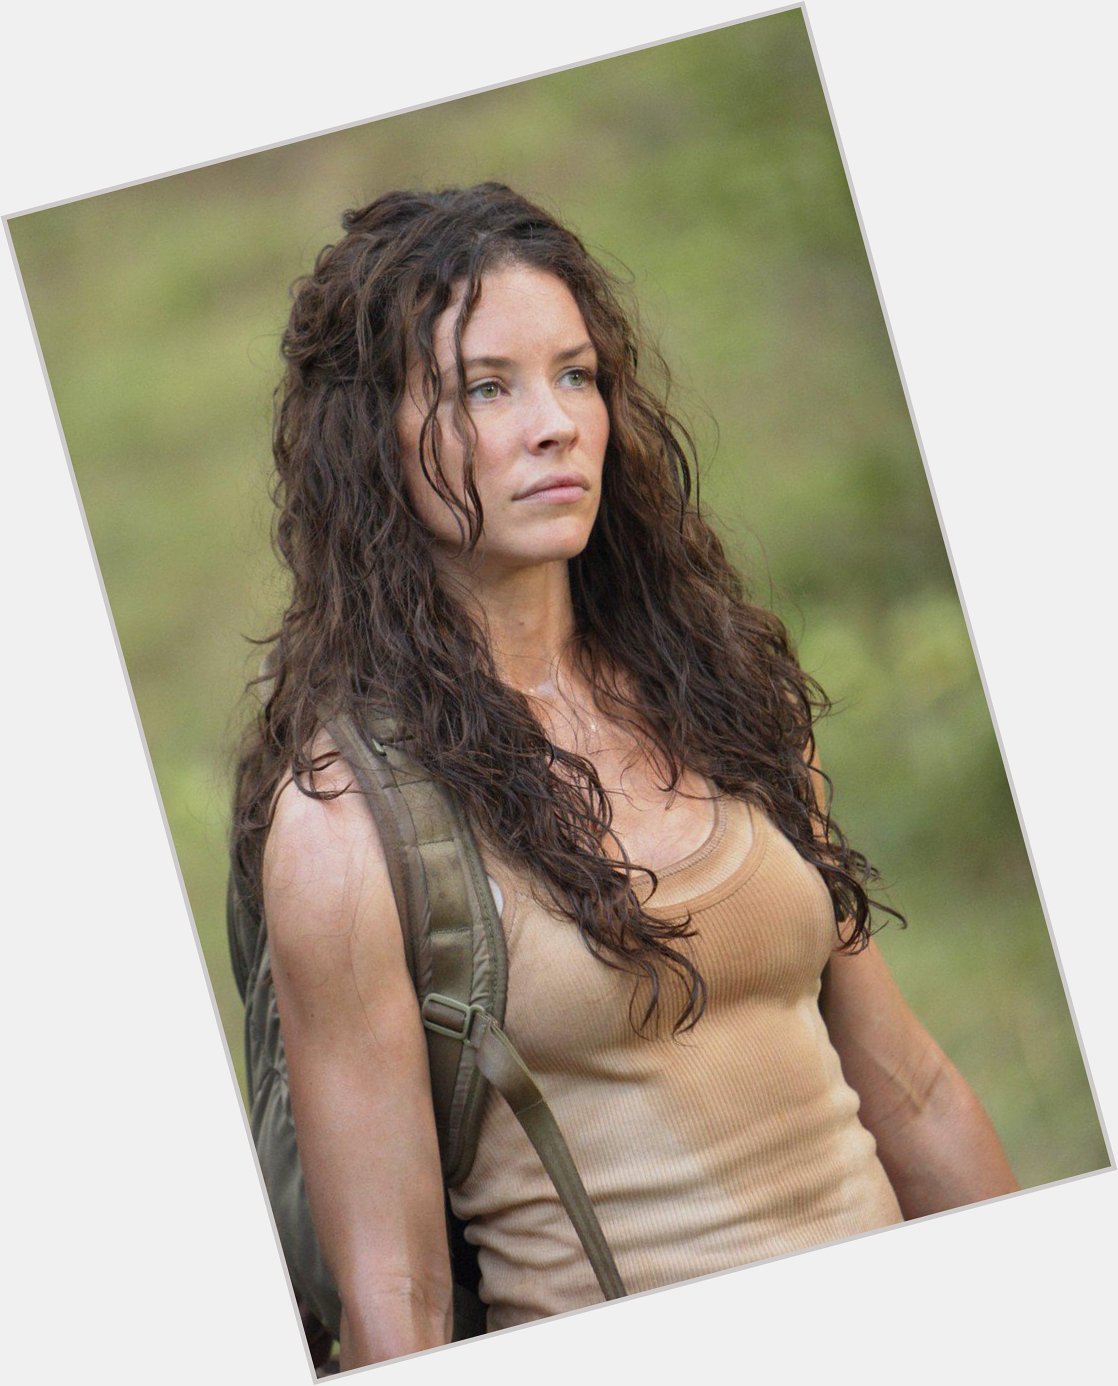 8/3: Happy 36th Birthday 2 actress Evangeline Lilly! Pop culture legend as Kate in Lost!   